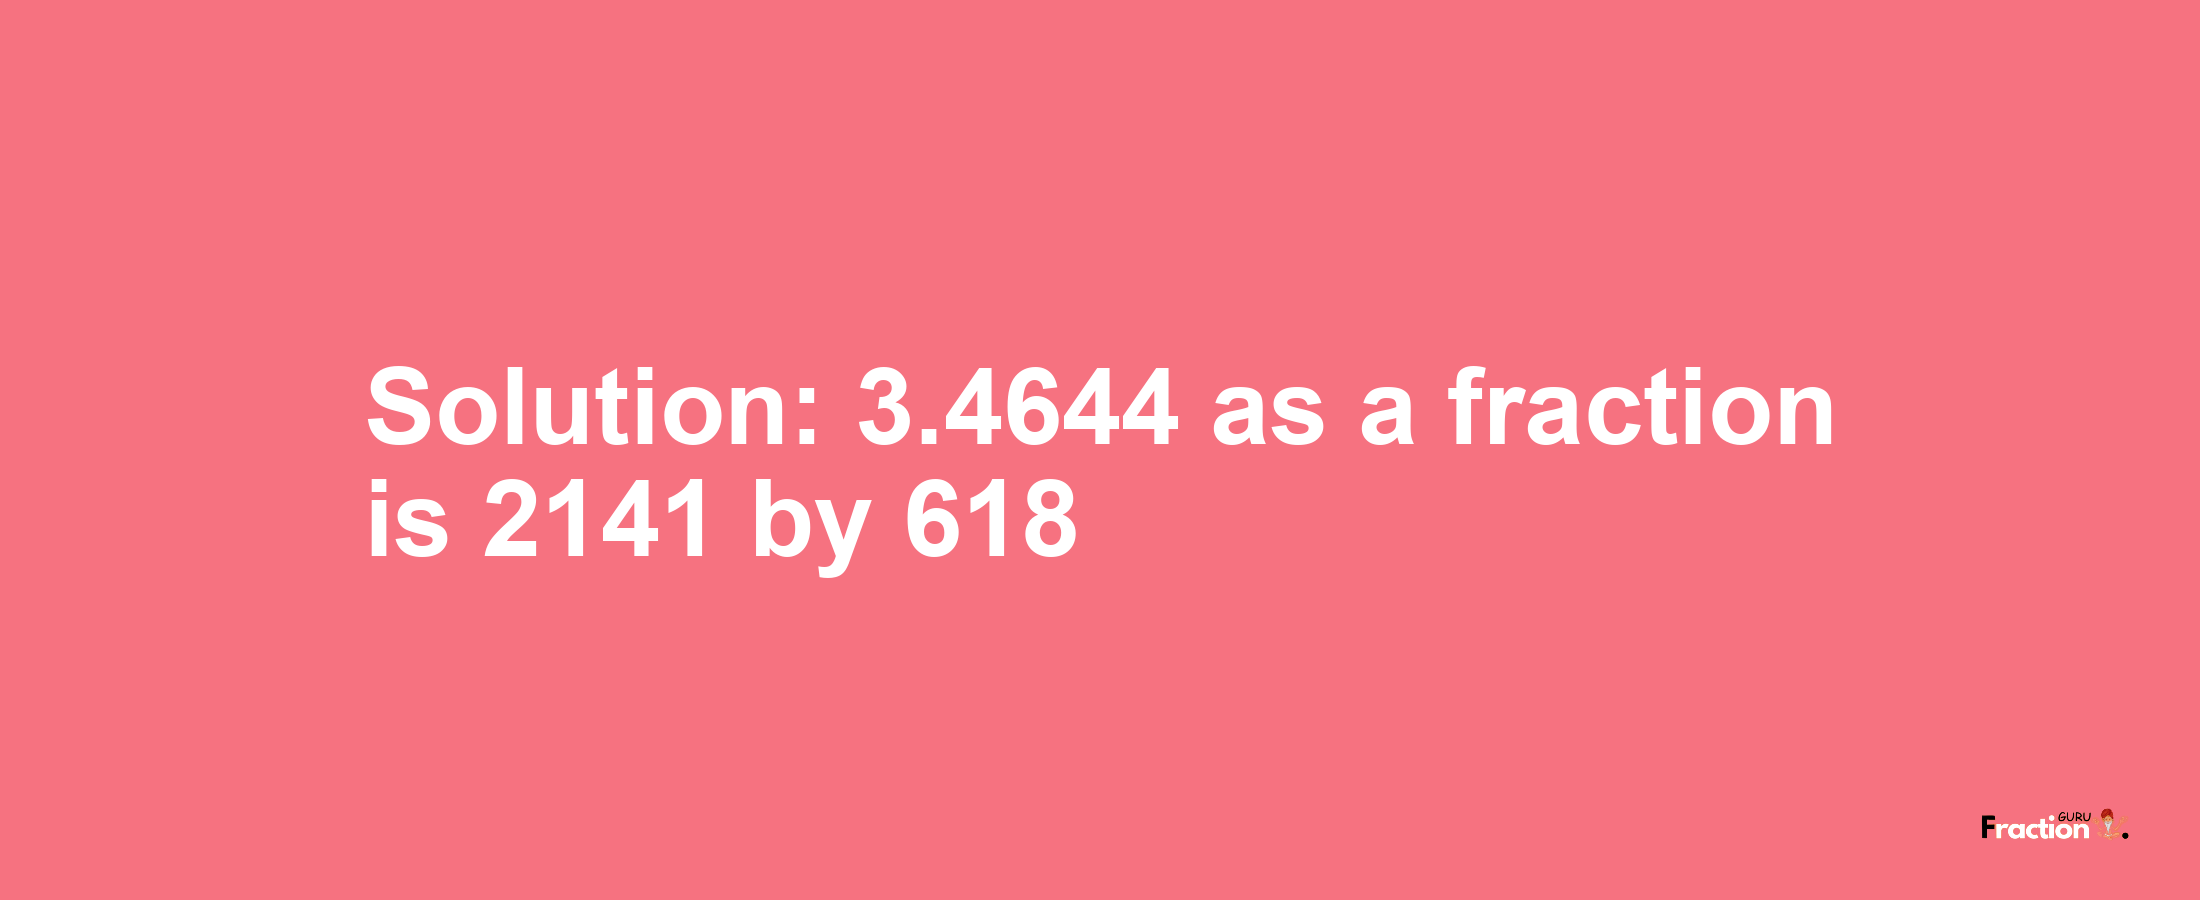 Solution:3.4644 as a fraction is 2141/618